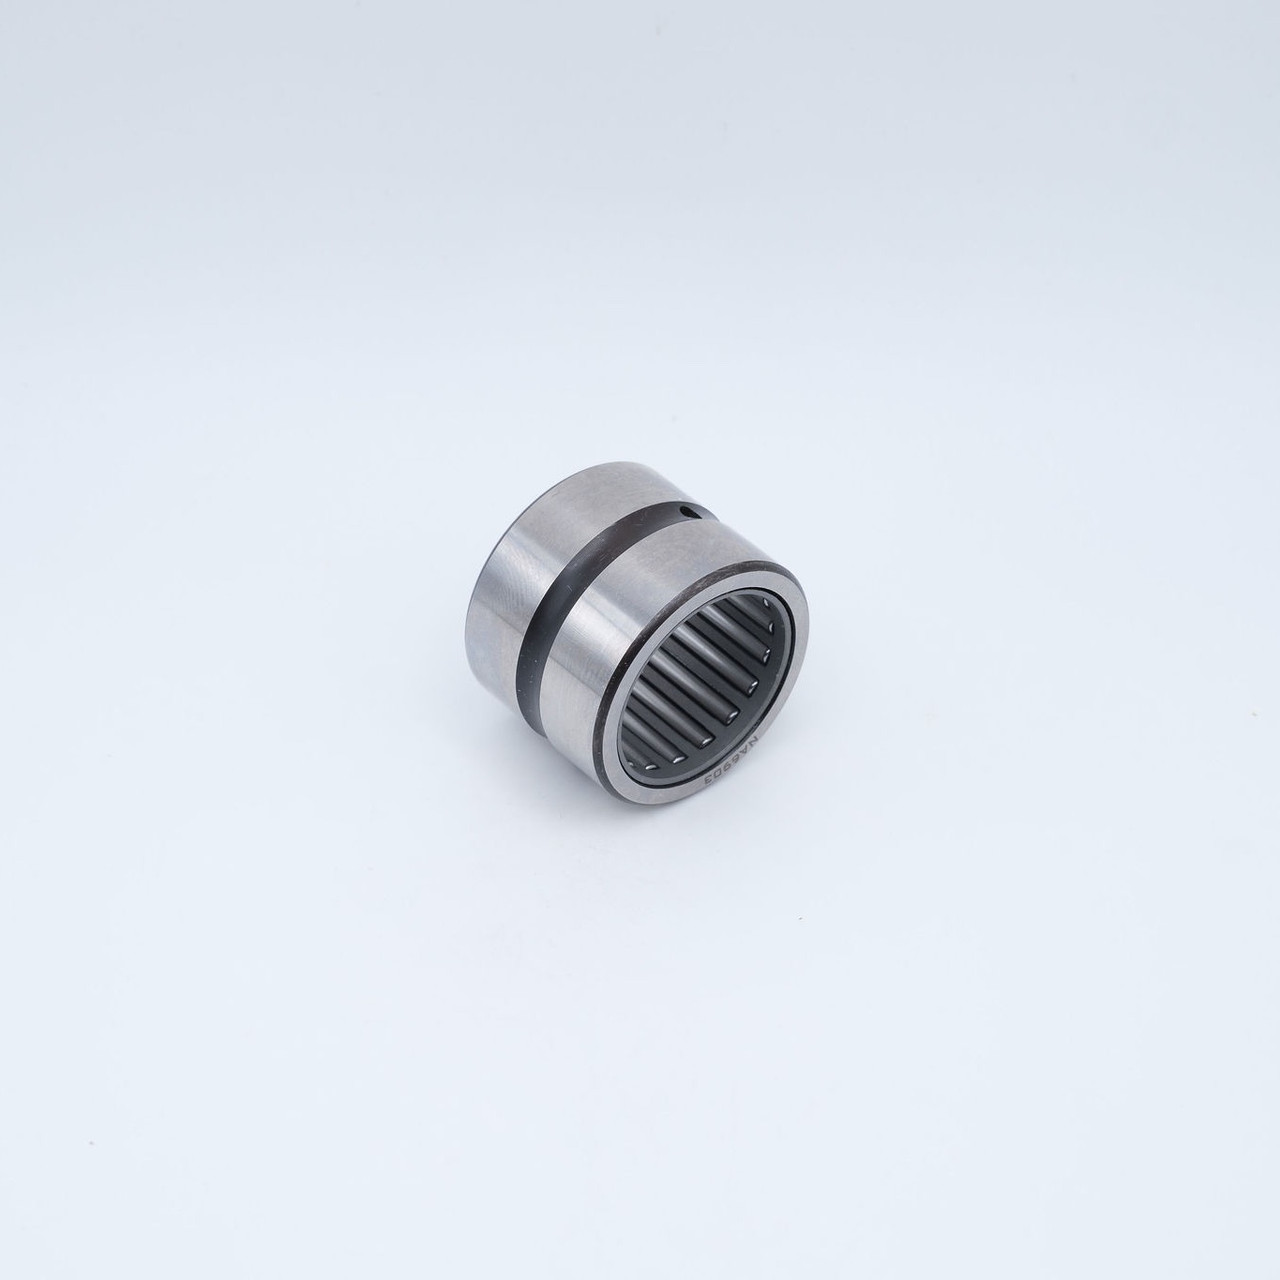 RNA6909 Machined Needle Roller 52x68x40 Angled View